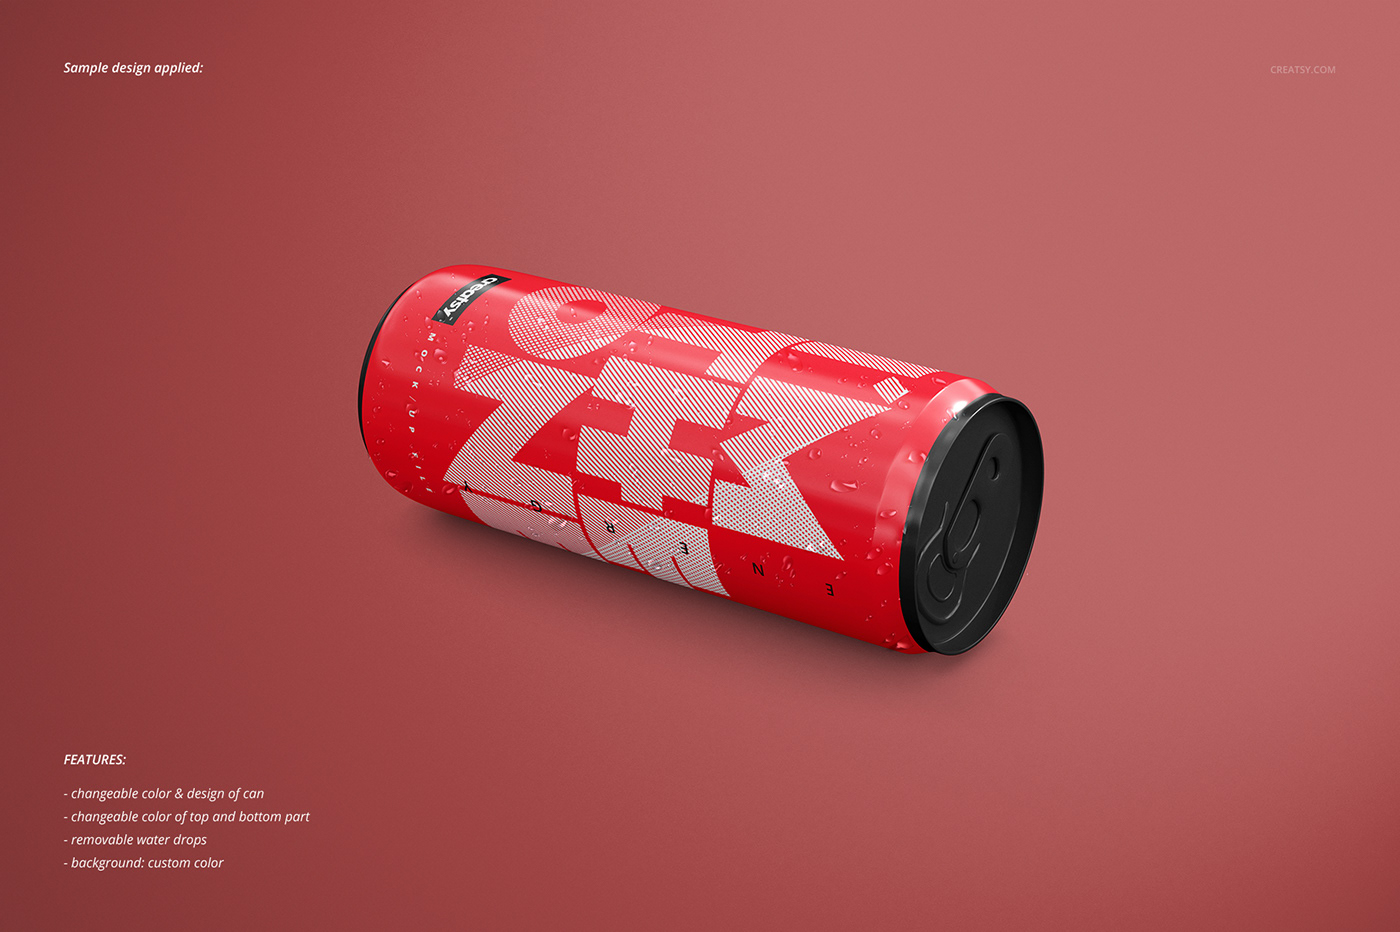 mock-up Mockup mockups template tall soda can cans energy drink